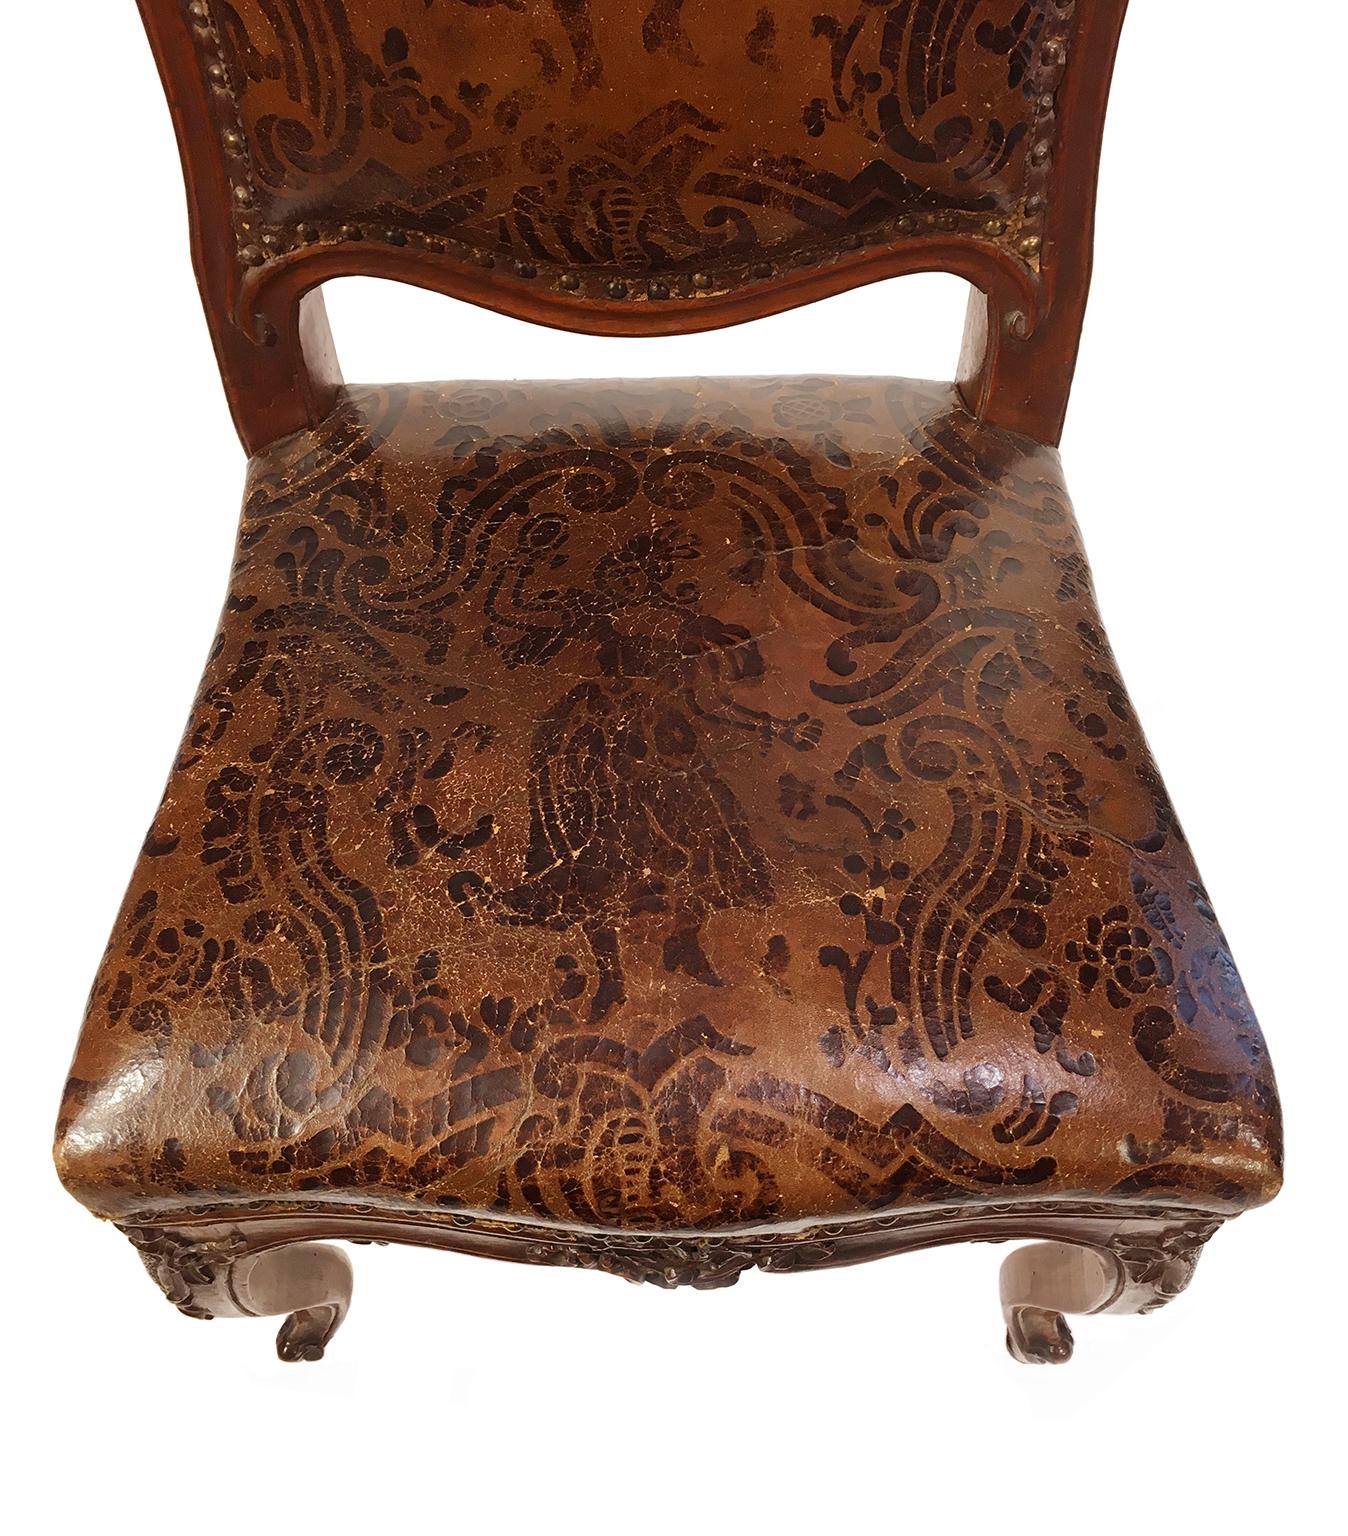 Italian Carved Walnut Chairs with Leather Covers, Milan, circa 1750 For Sale 5